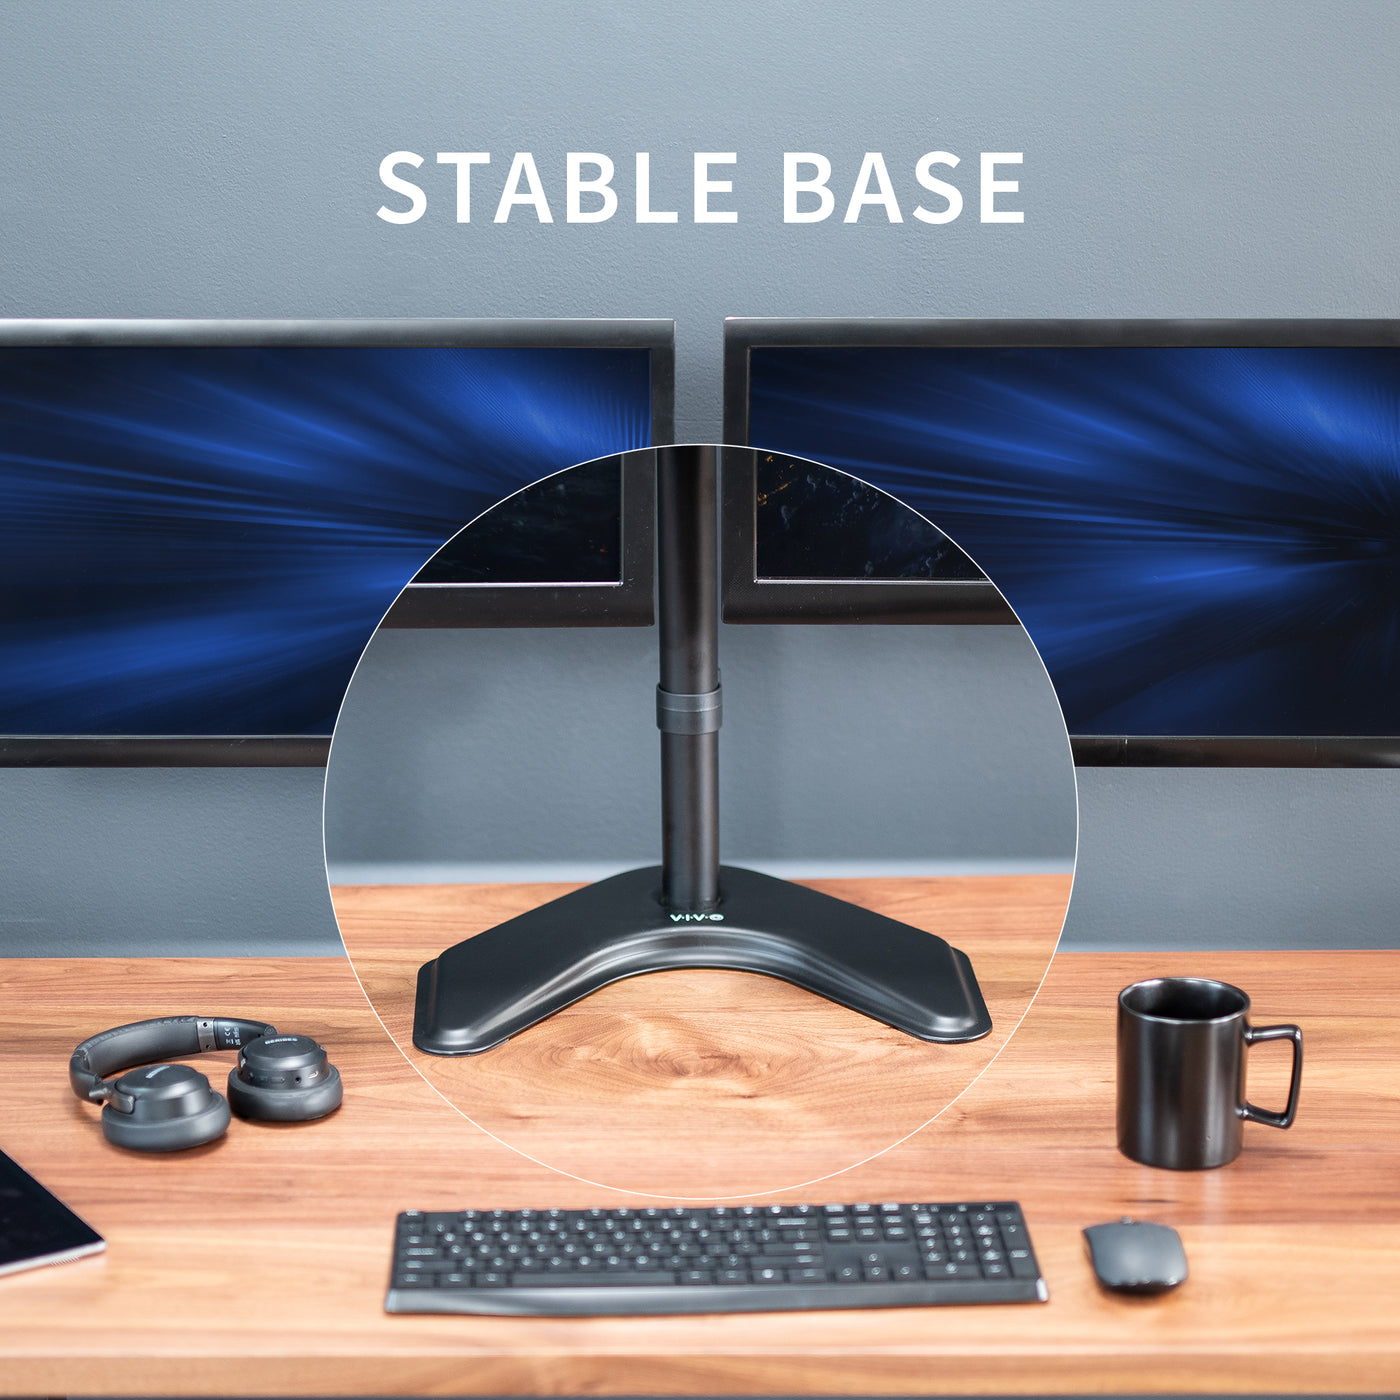 Enjoy ergonomic viewing angles with our freestanding dual monitor stand. 